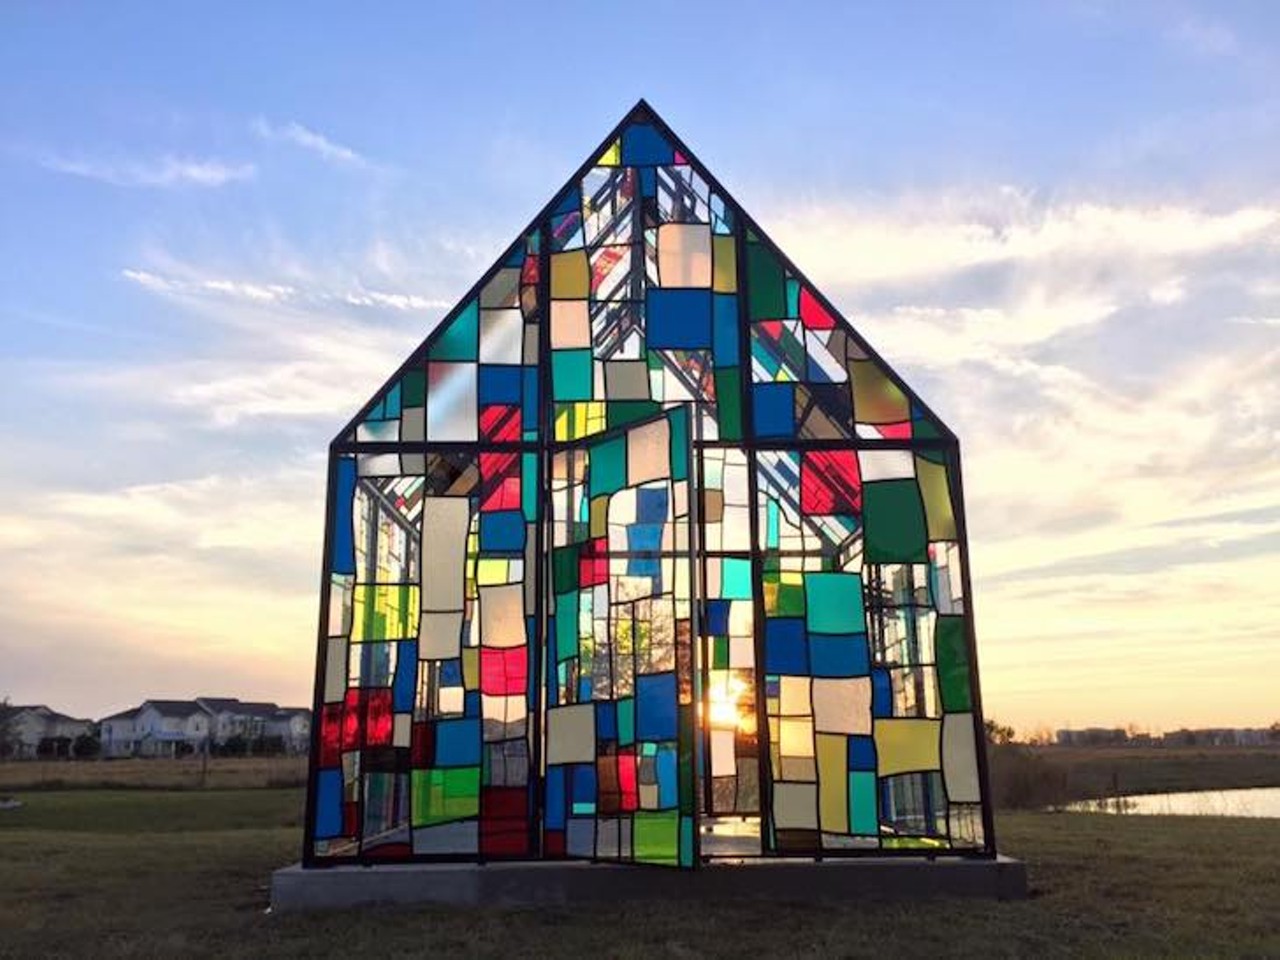 Tom Fruin's Glass House 
13615 Sachs Ave.
This beautiful landmark outside Canvas restaurant in Lake Nona was created by sculptor Tom Fruin as part of his ongoing ICON series. Visit this gorgeous work of art in the daytime for the perfect Instagram picture, or witness it lit brilliantly from the inside at night.
Photo via Lake Nona/lakenona.com